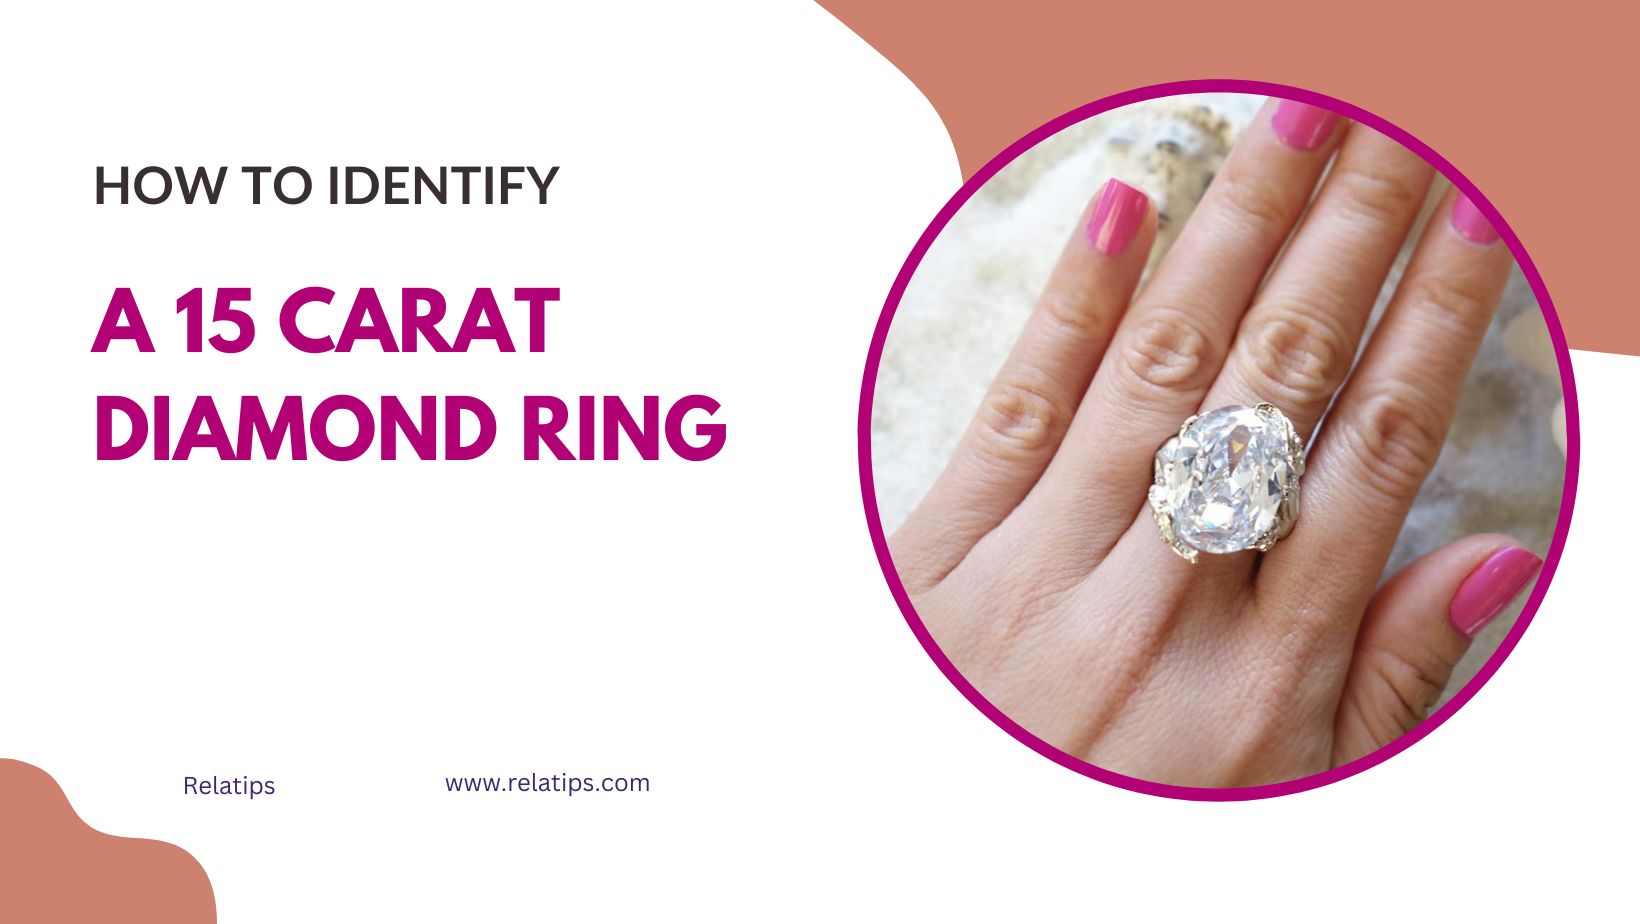 How to Identify a 15 Carat Diamond Ring